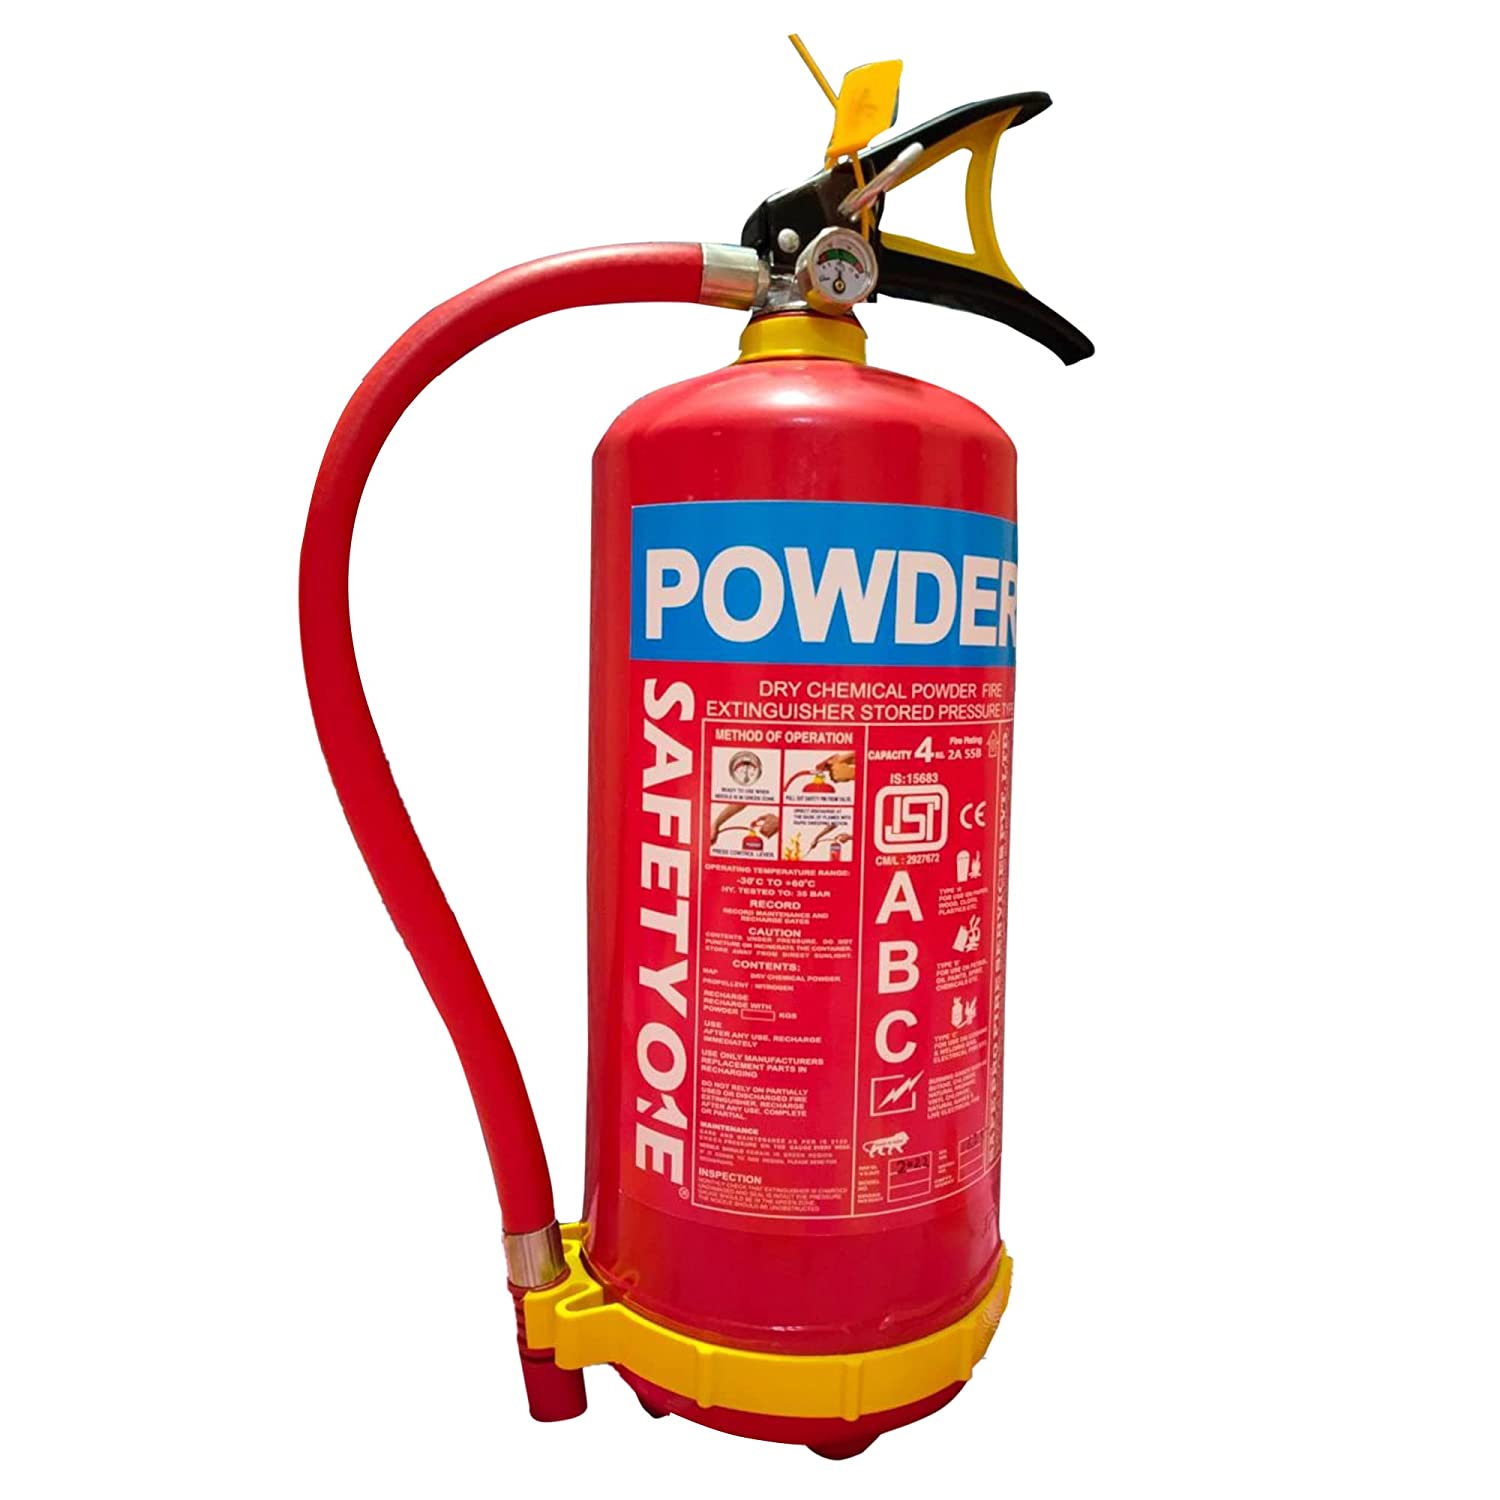 Fire Extinguisher Selection and Position